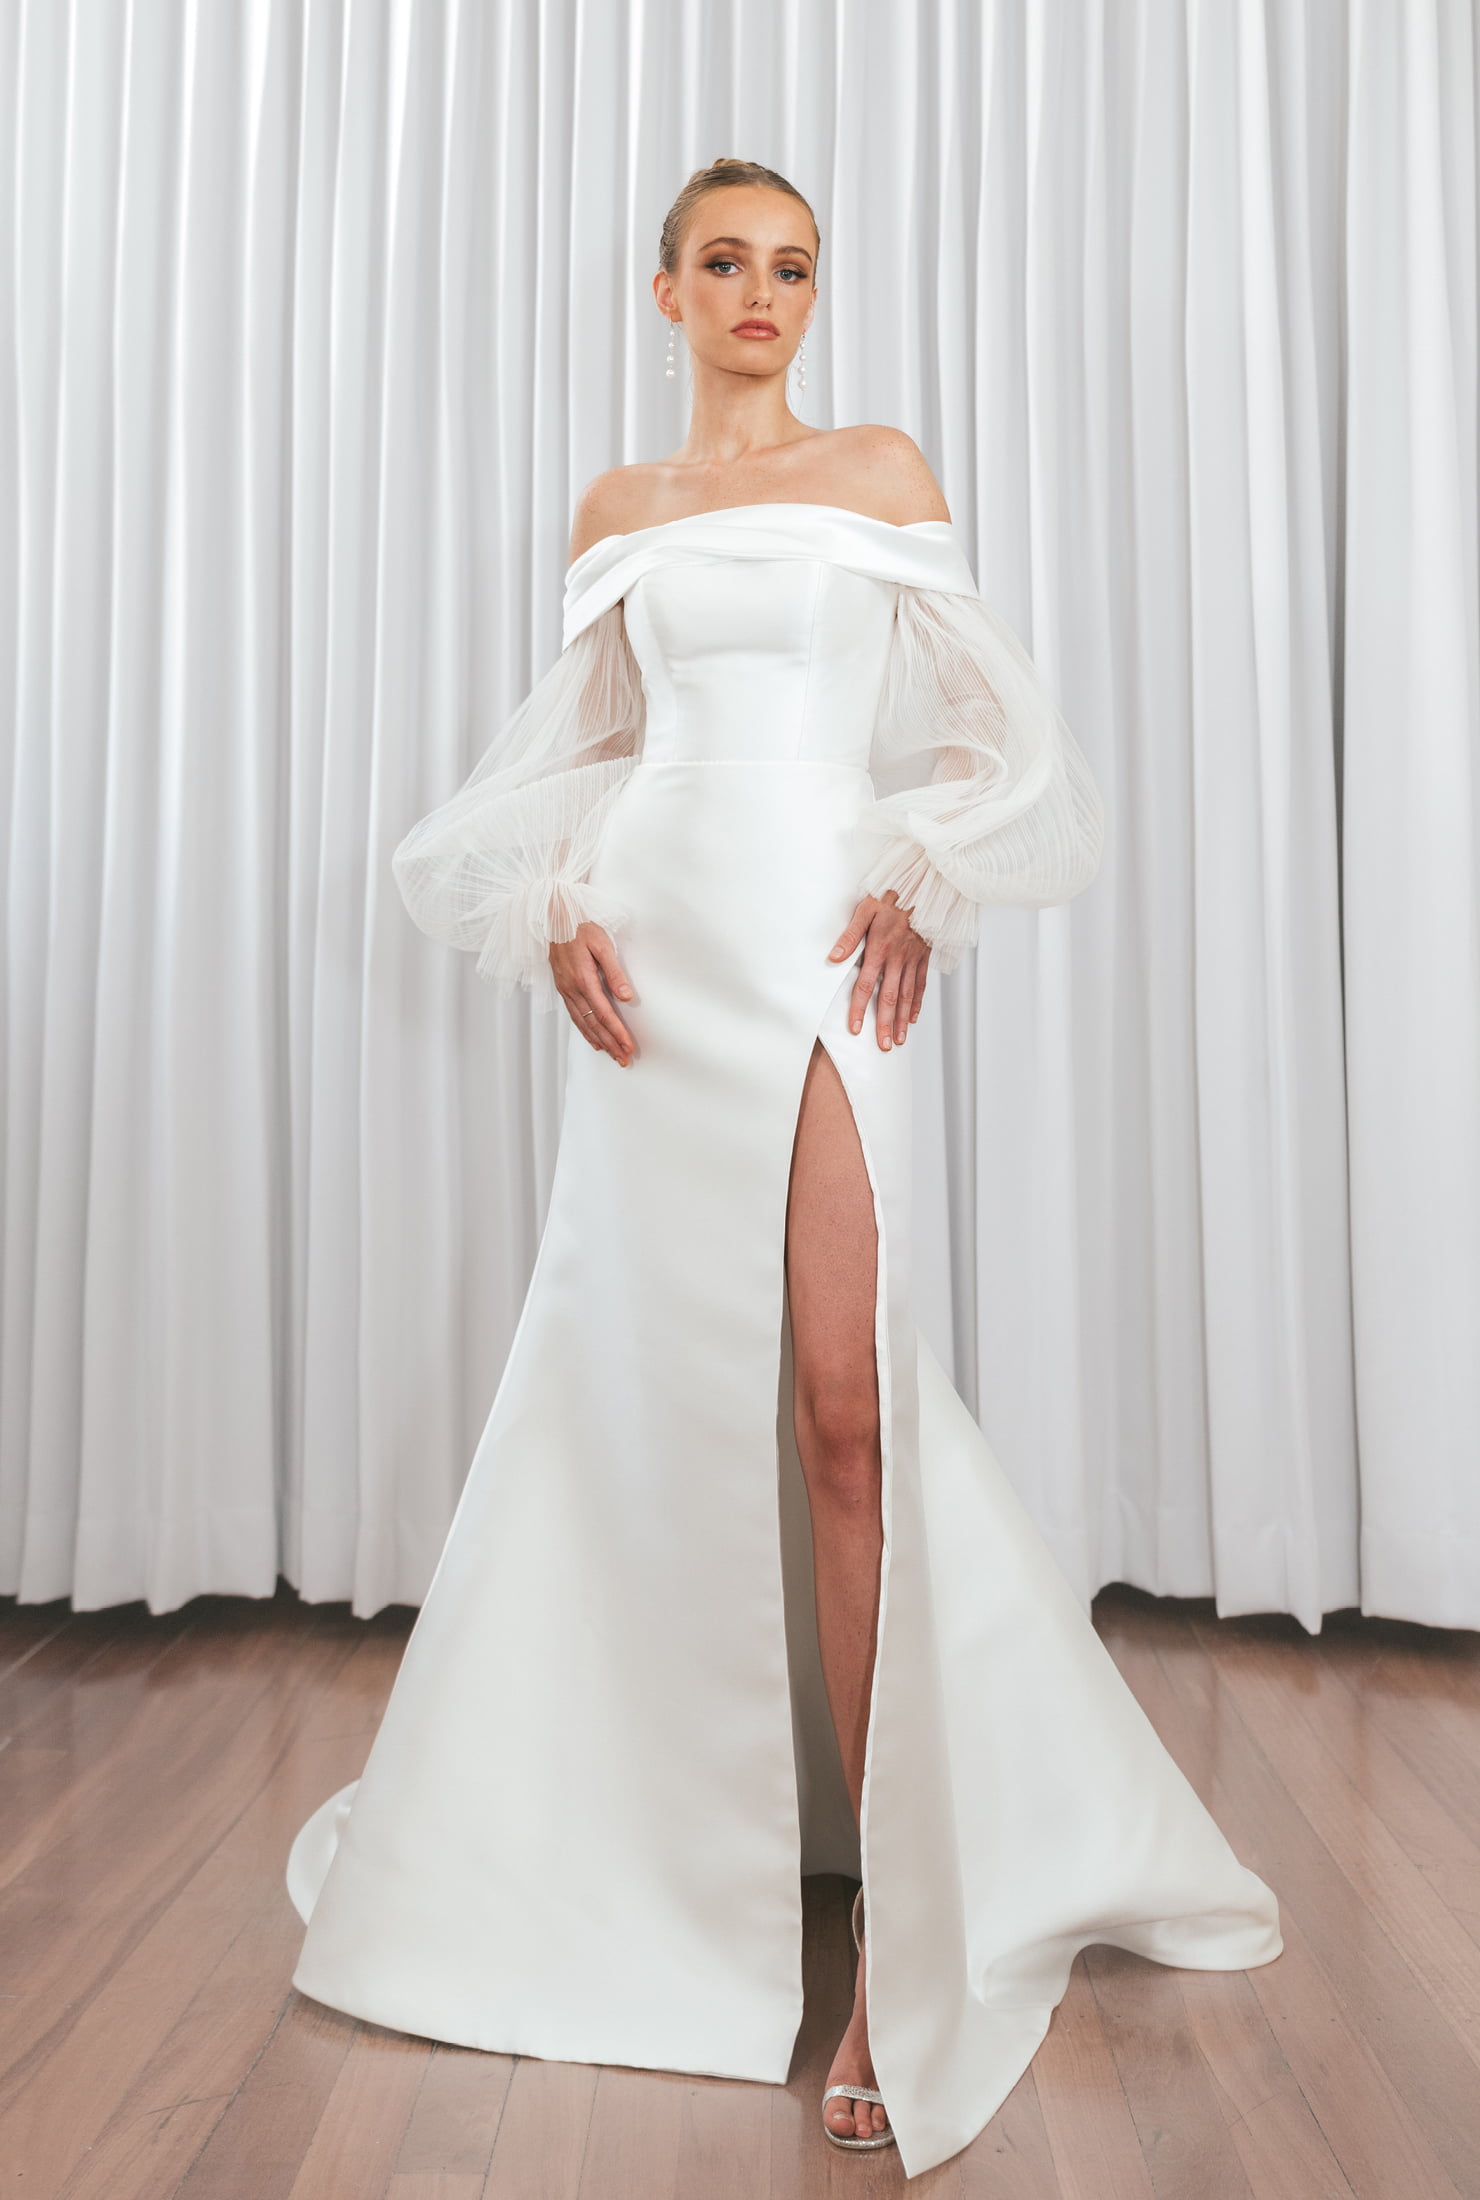 20 BEAUT BRIDAL GOWNS WITH SLEEVES (& ONE SUIT!) – Hello May